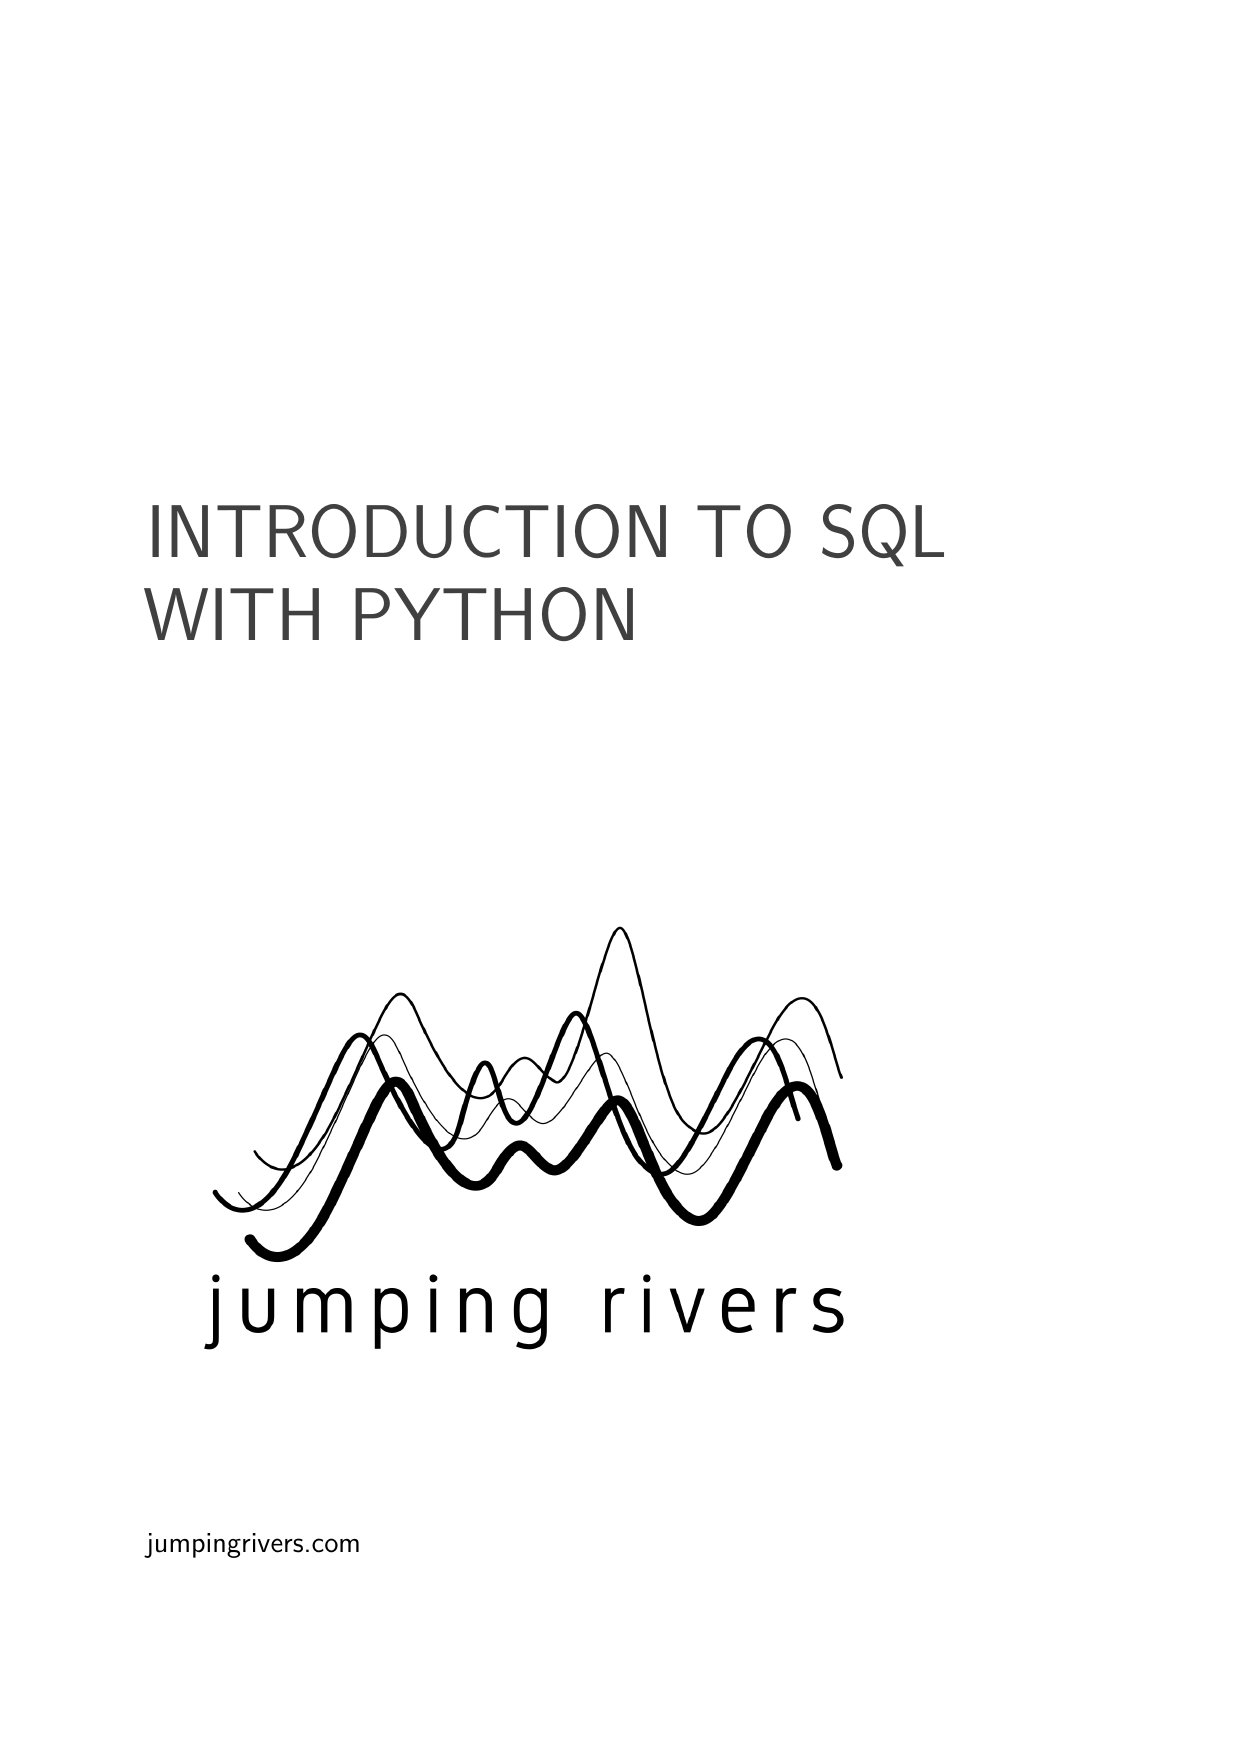 Page 1 of example course material for  Introduction to SQL with Python